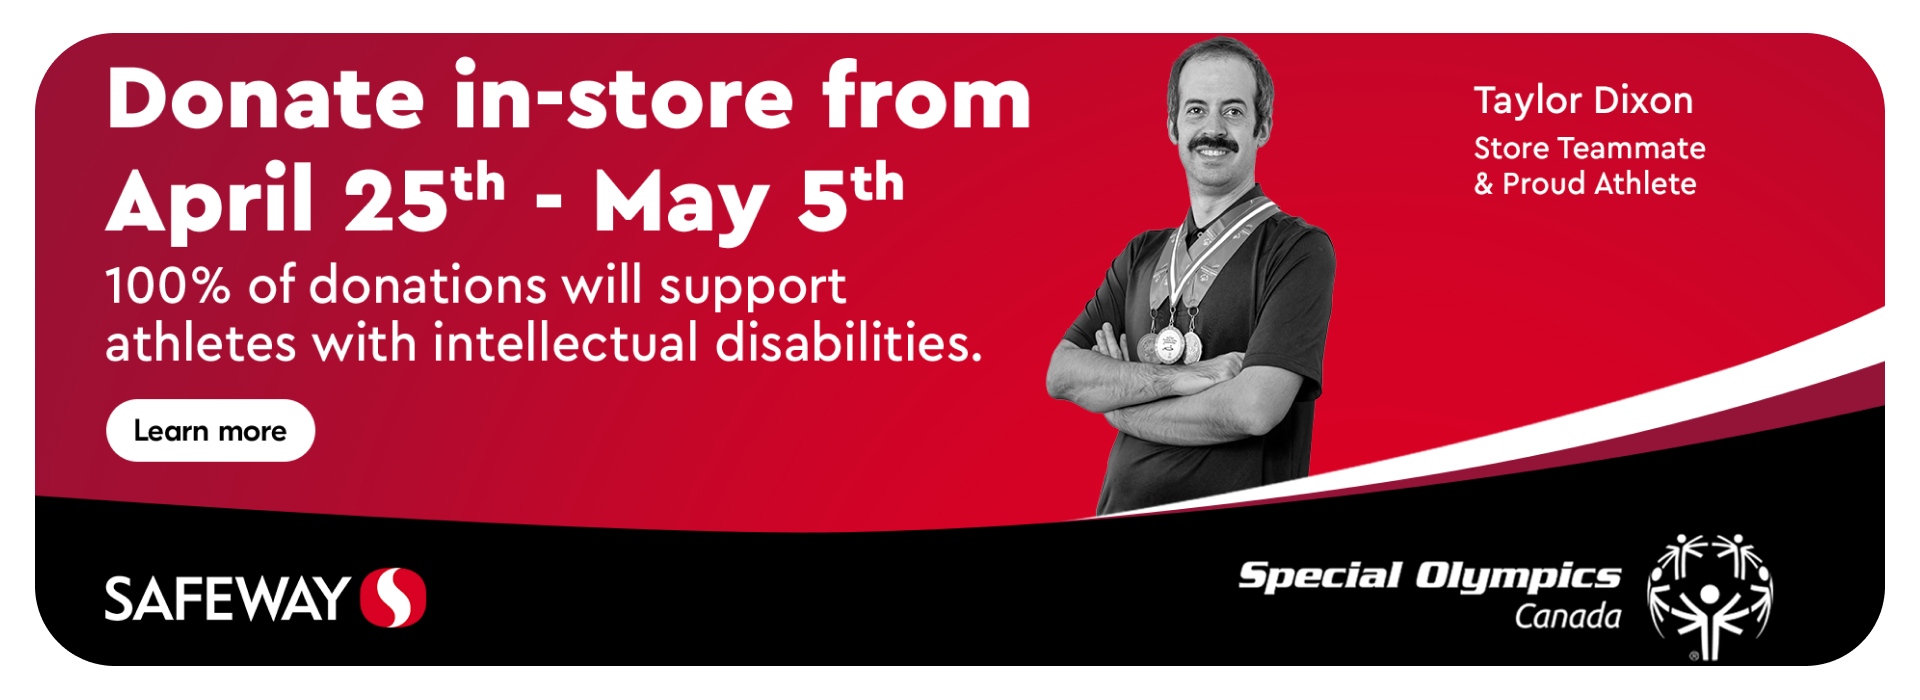 Donate in store April 25th - May 5th to support athletes with intellectual disabilities in our community.